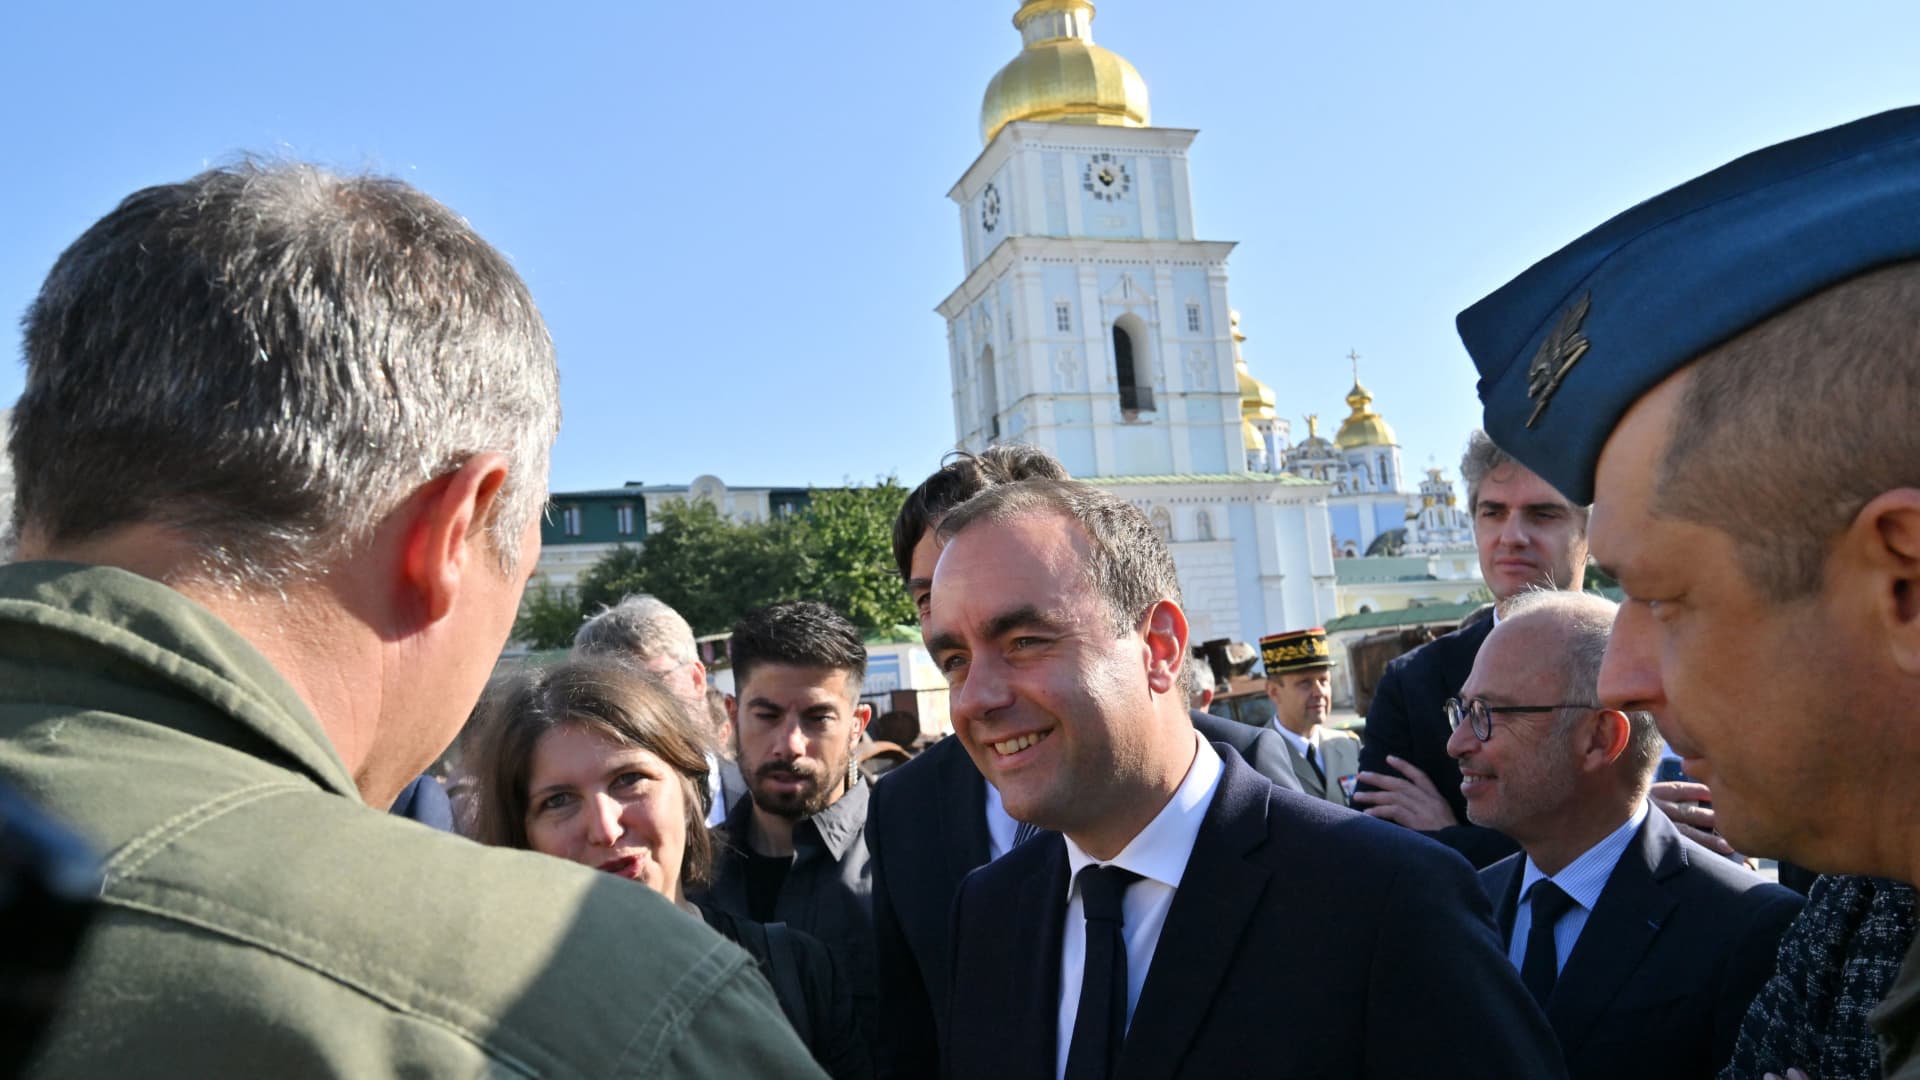 French Armies Minister Sebastien Lecornu (C) addresses the press next to the St. Michael's Golden-Domed cathedral during the Minister's visit in Kyiv on September 28, 2023, amid the Russian invasion of Ukraine.